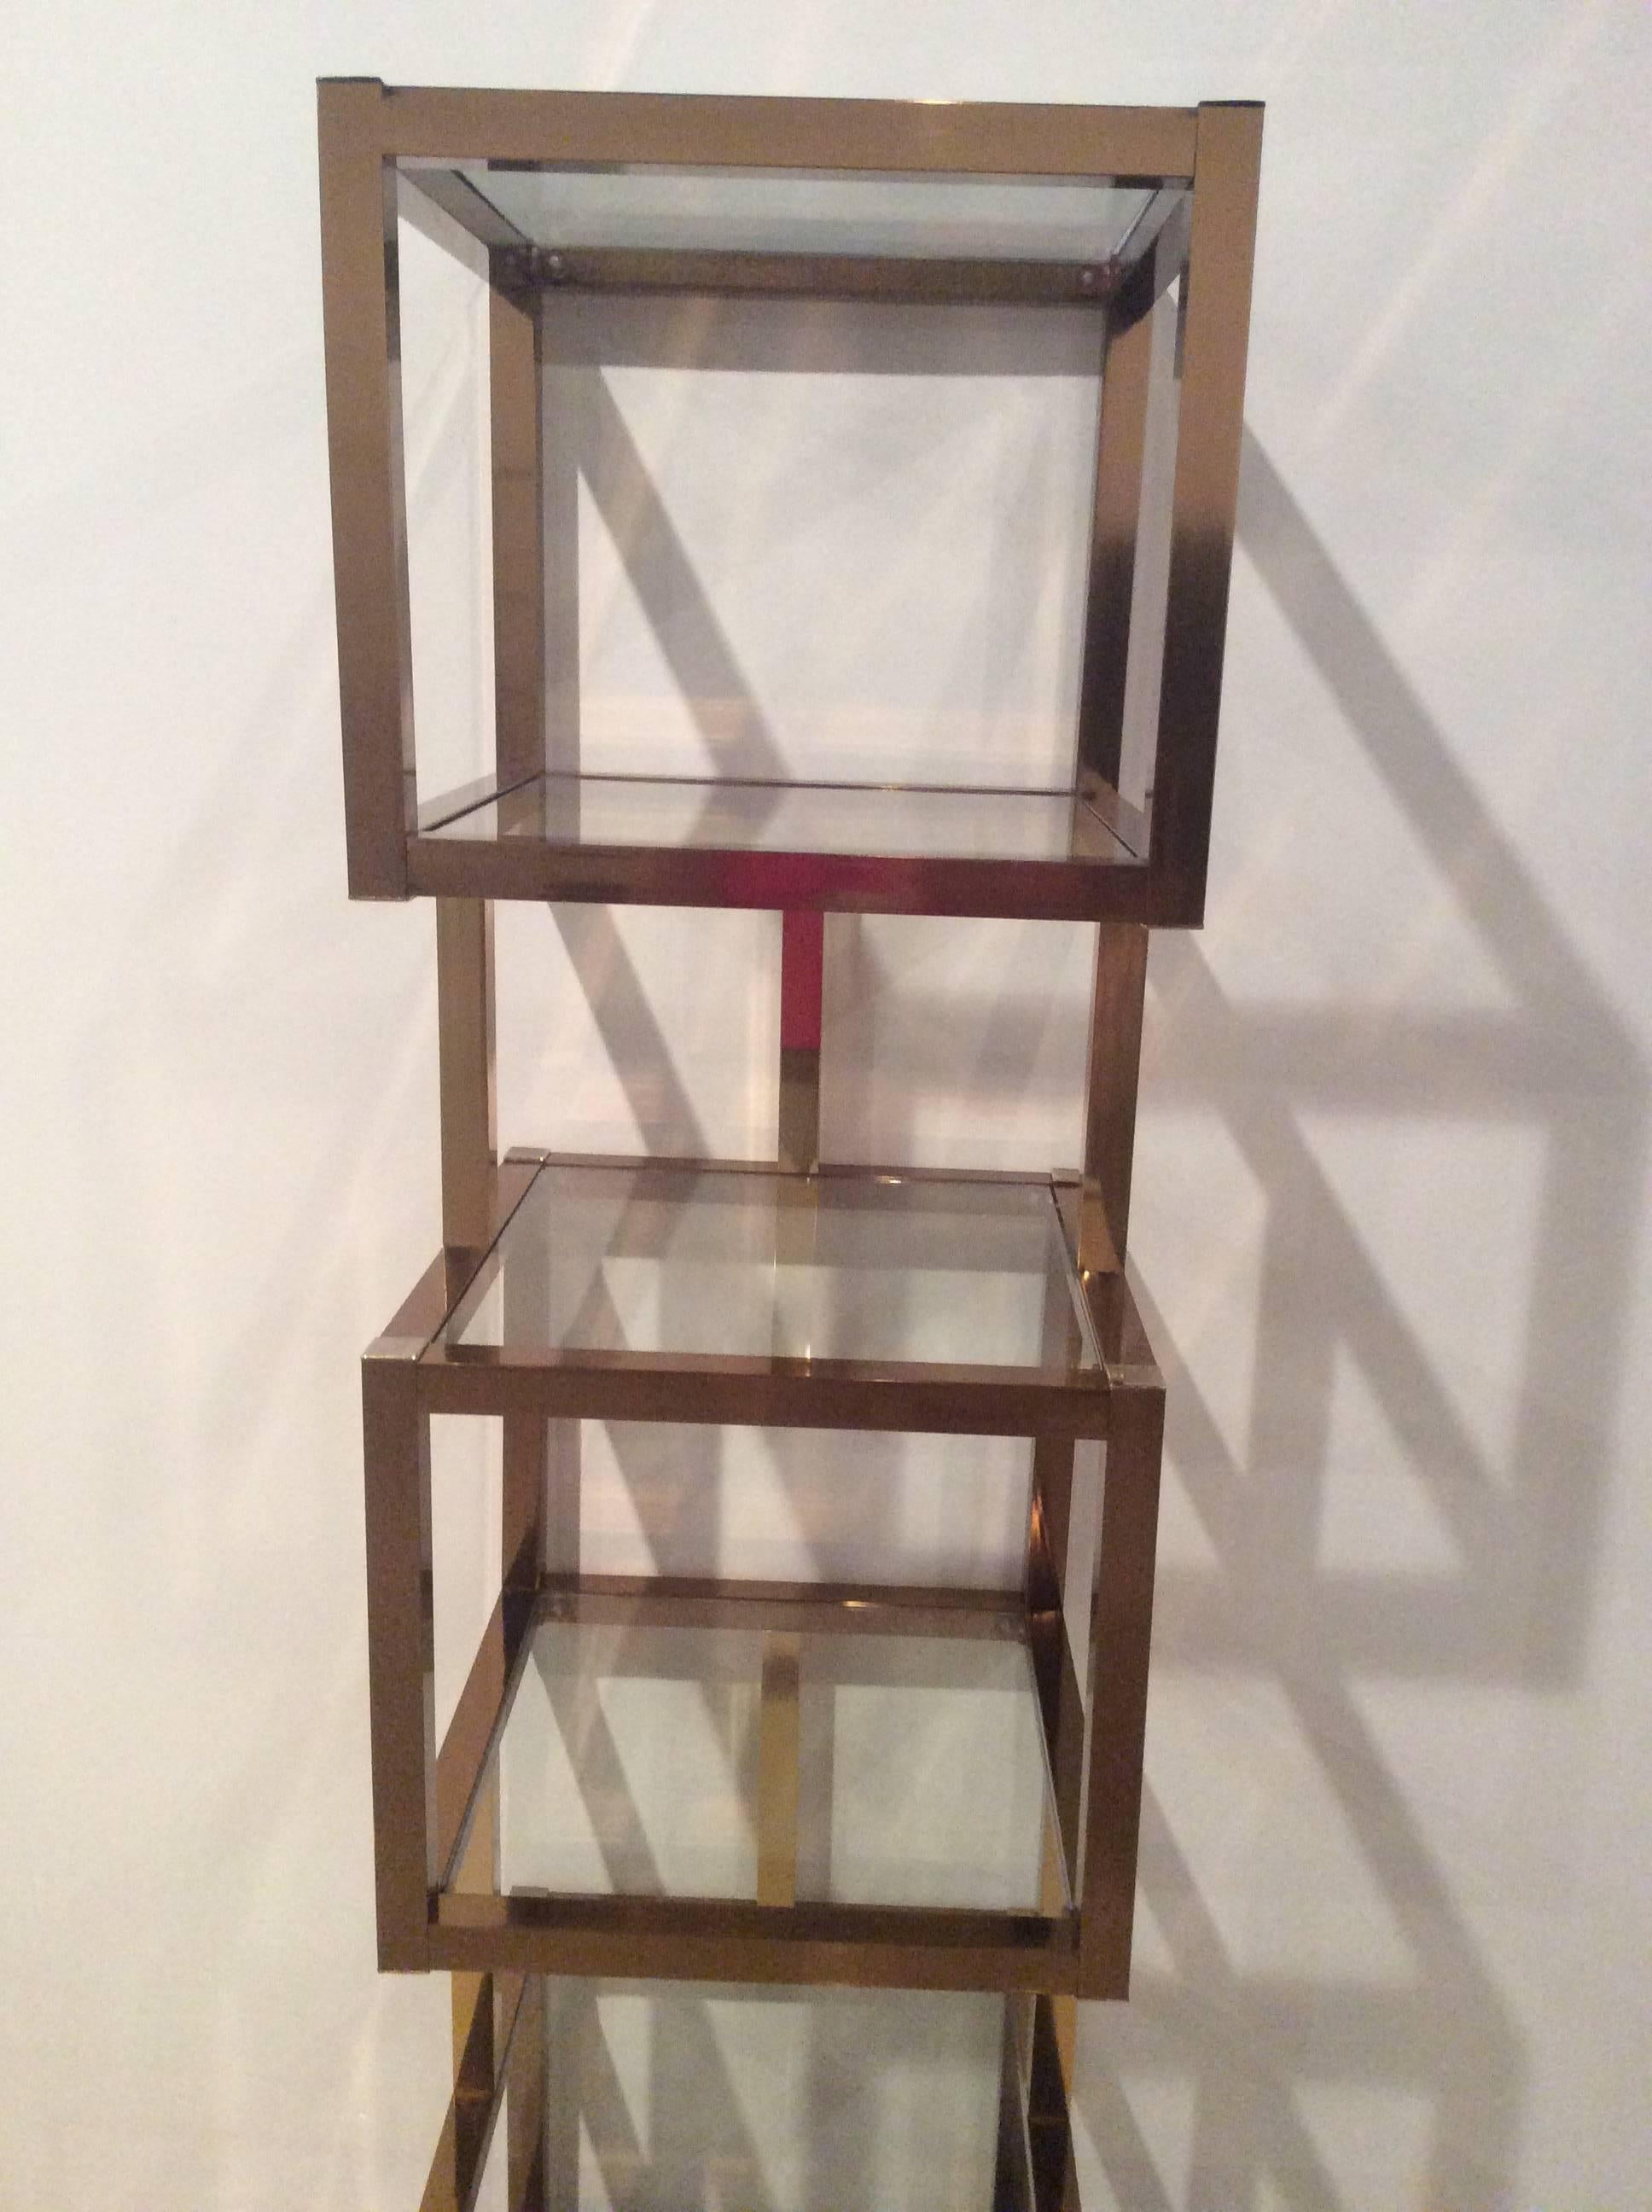 20th Century Brass Gold & Rose Copper Cube Square Etagere Vintage Glass Shelves Mixed Metals